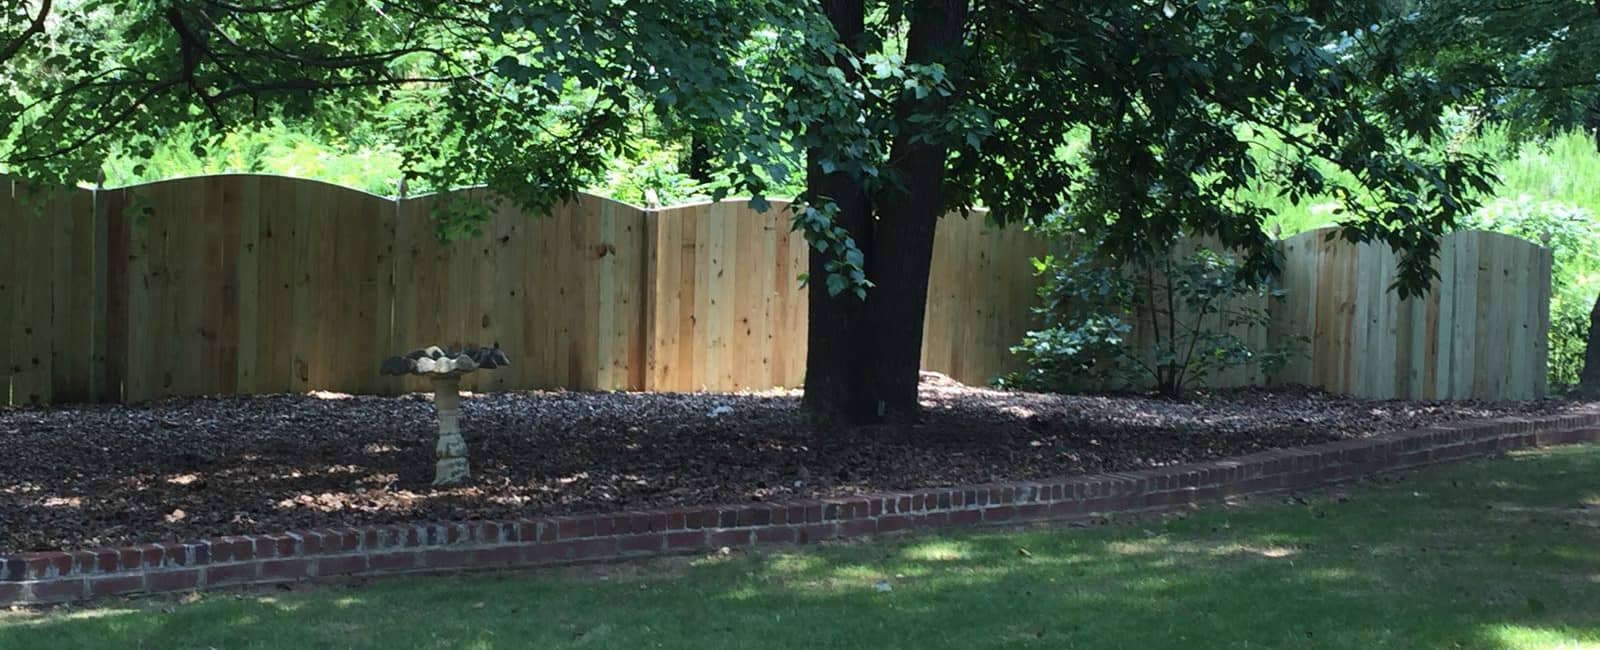 SDF Arched Privacy Fence 4.jpg